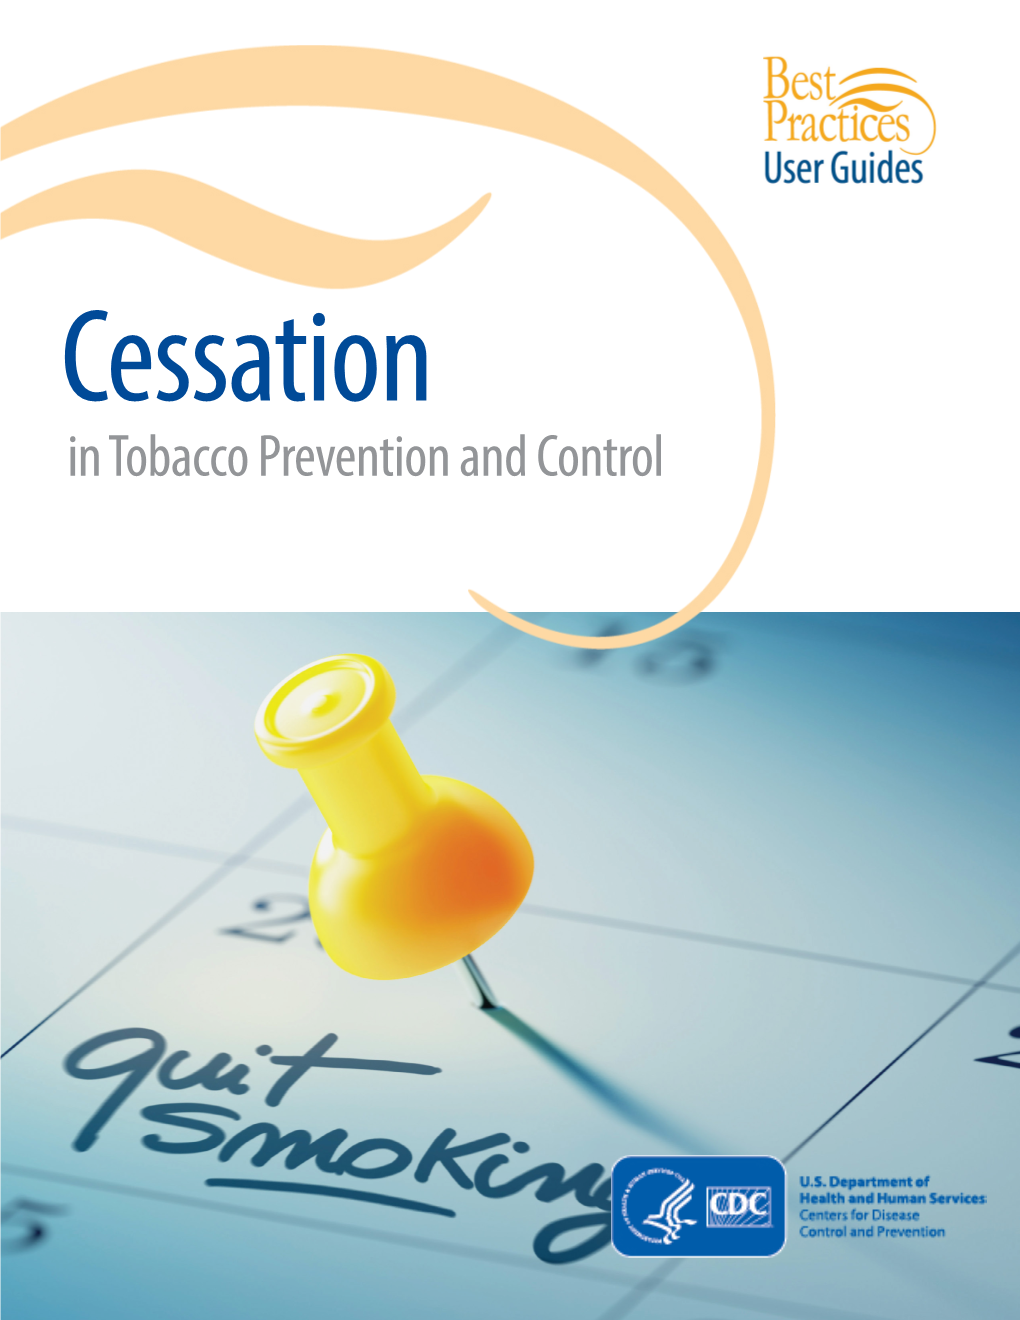 Best Practices User Guides-Cessation in Tobacco